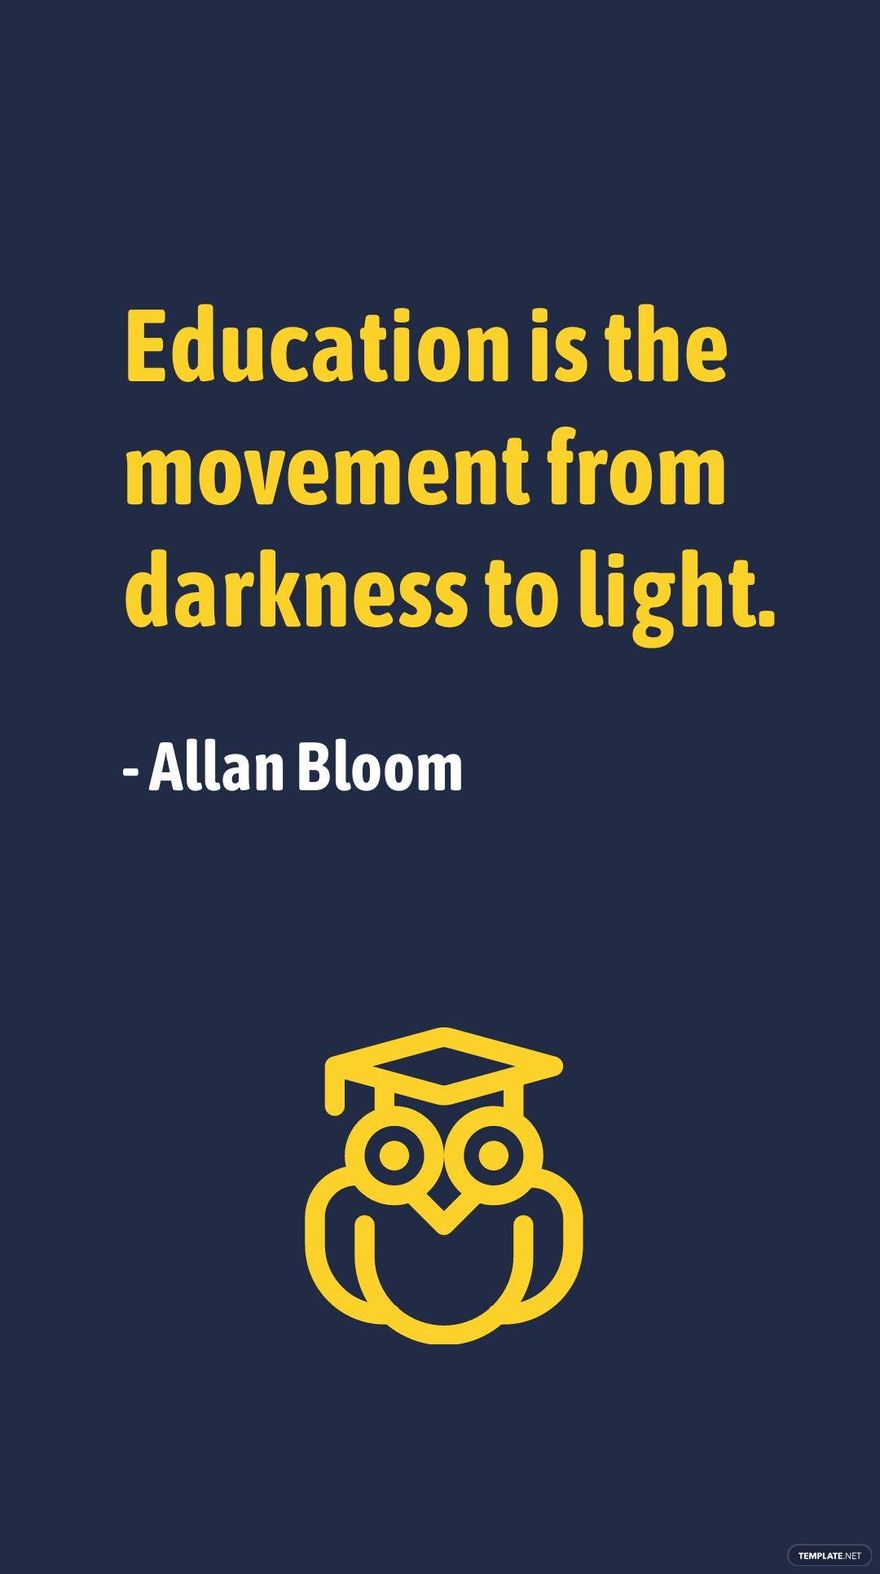 Allan Bloom - Education is the movement from darkness to light. in JPG